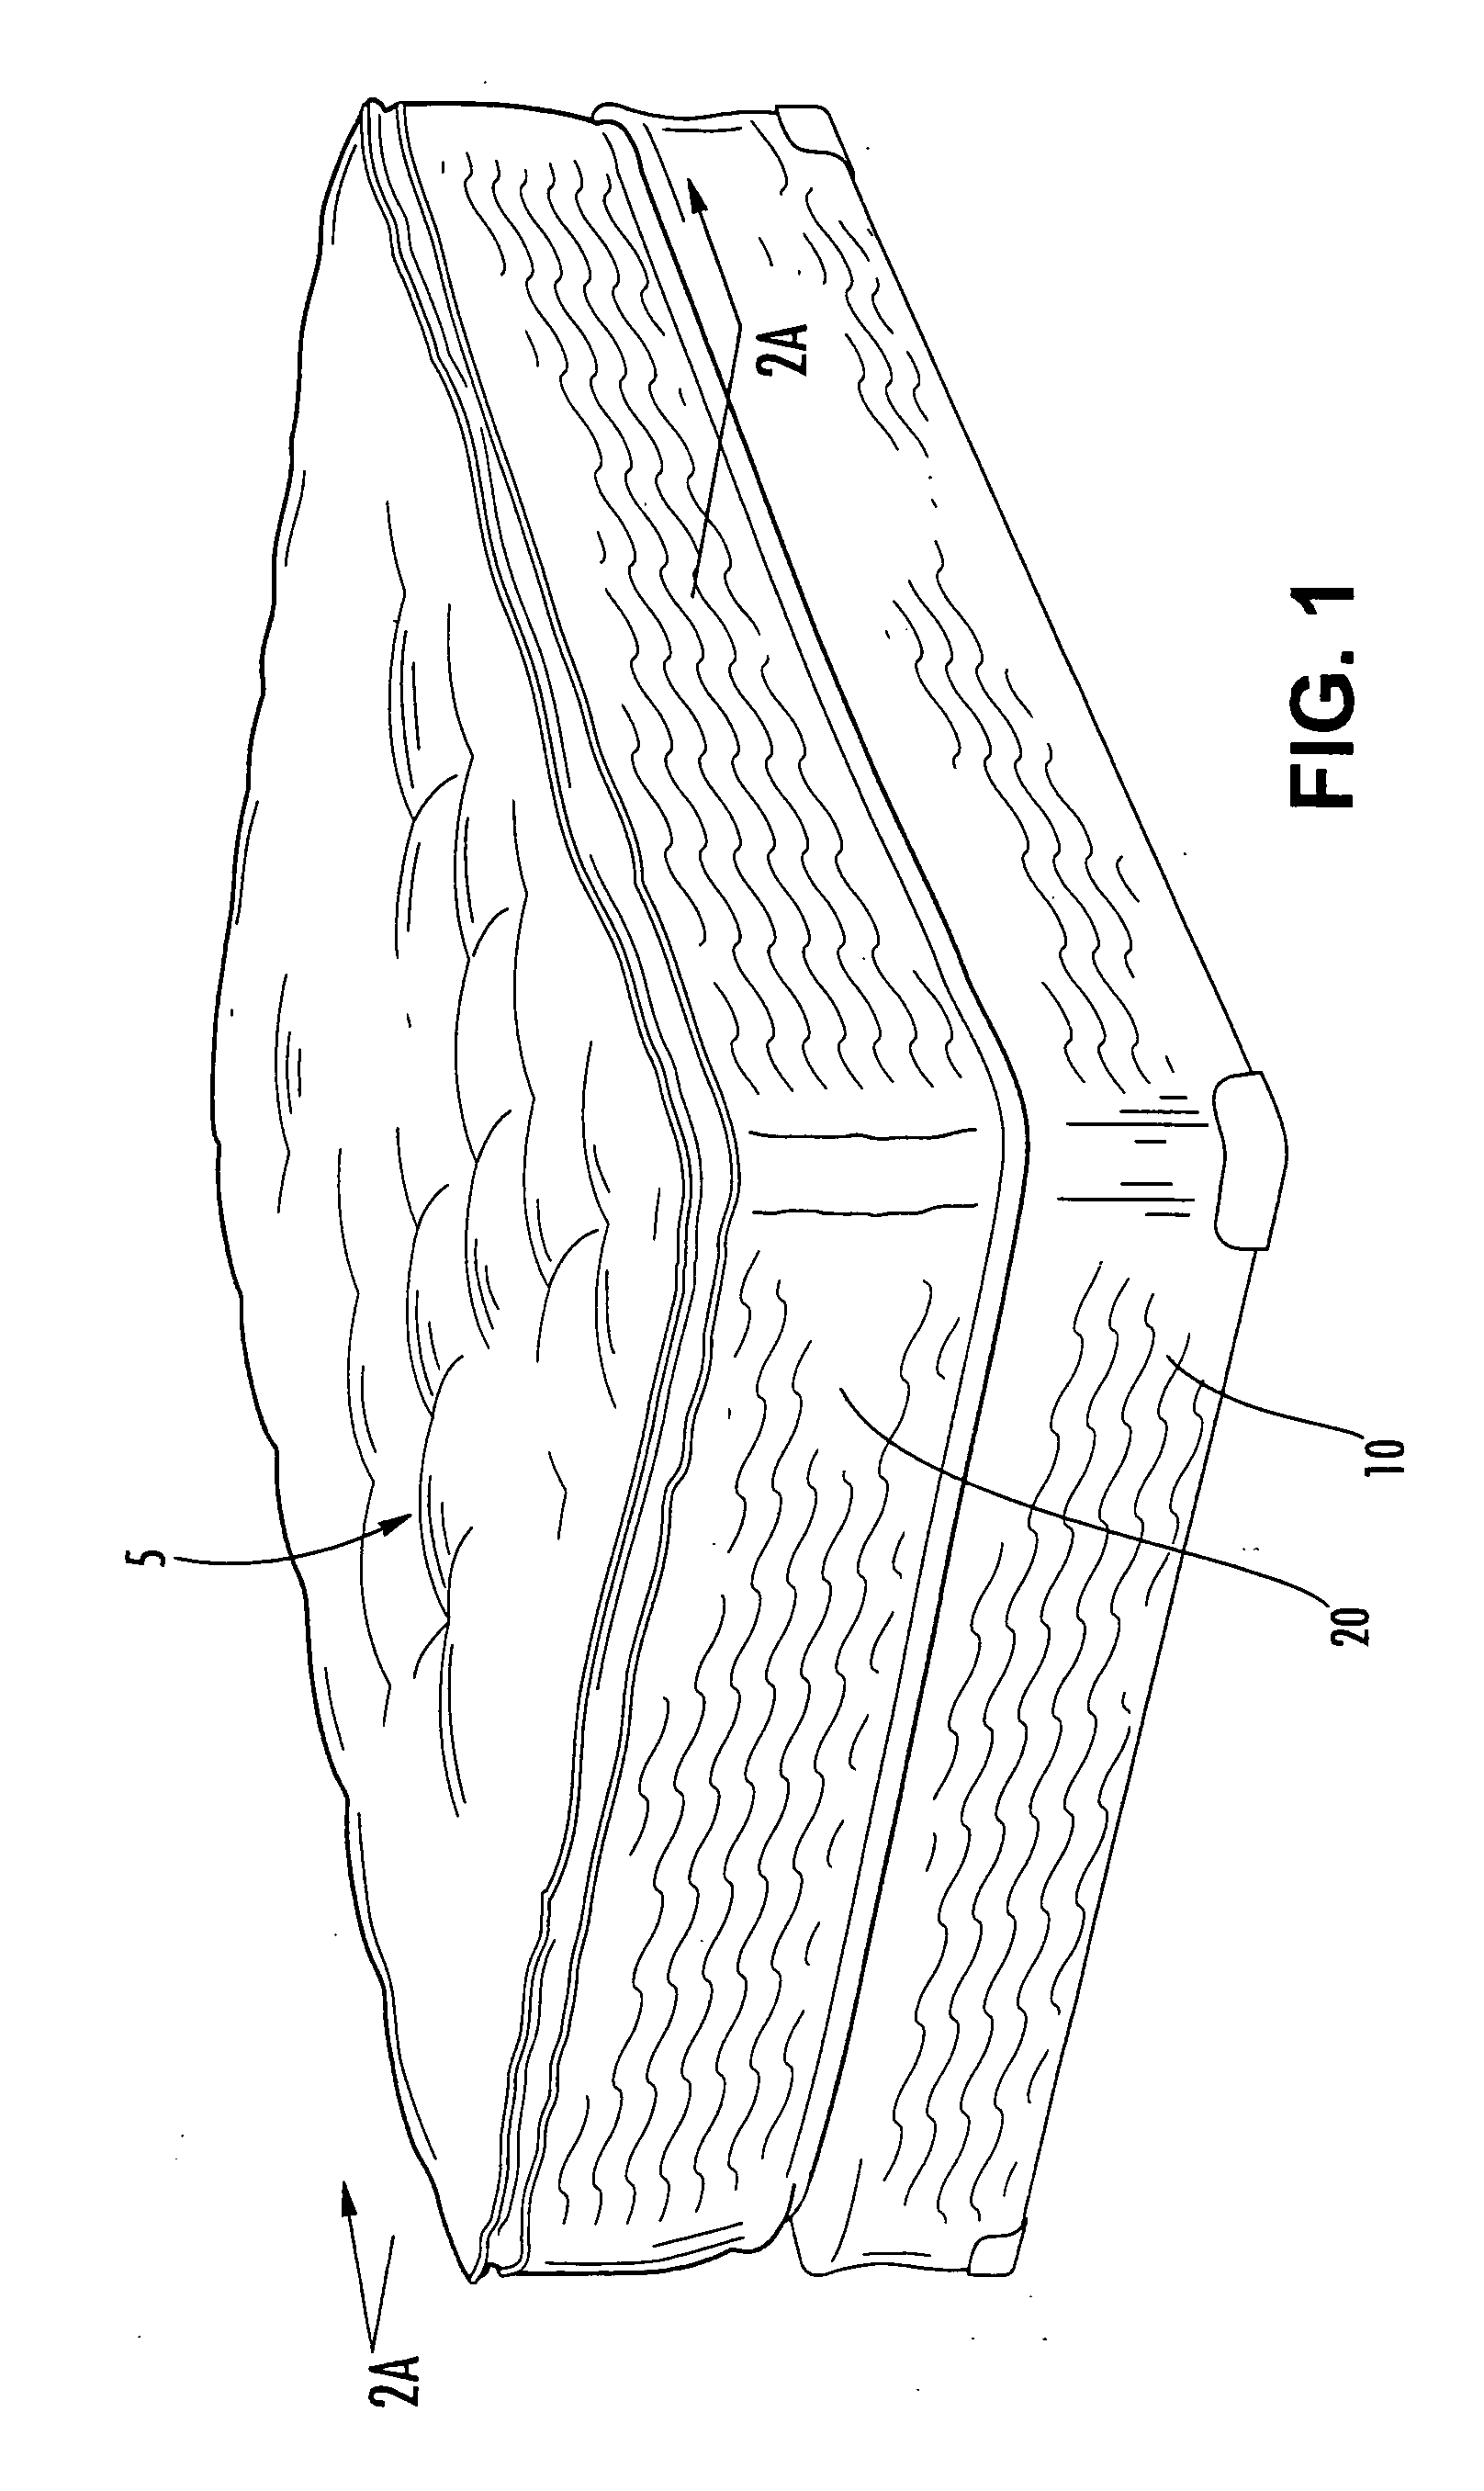 Heat and flame-resistant materials and upholstered articles incorporating same